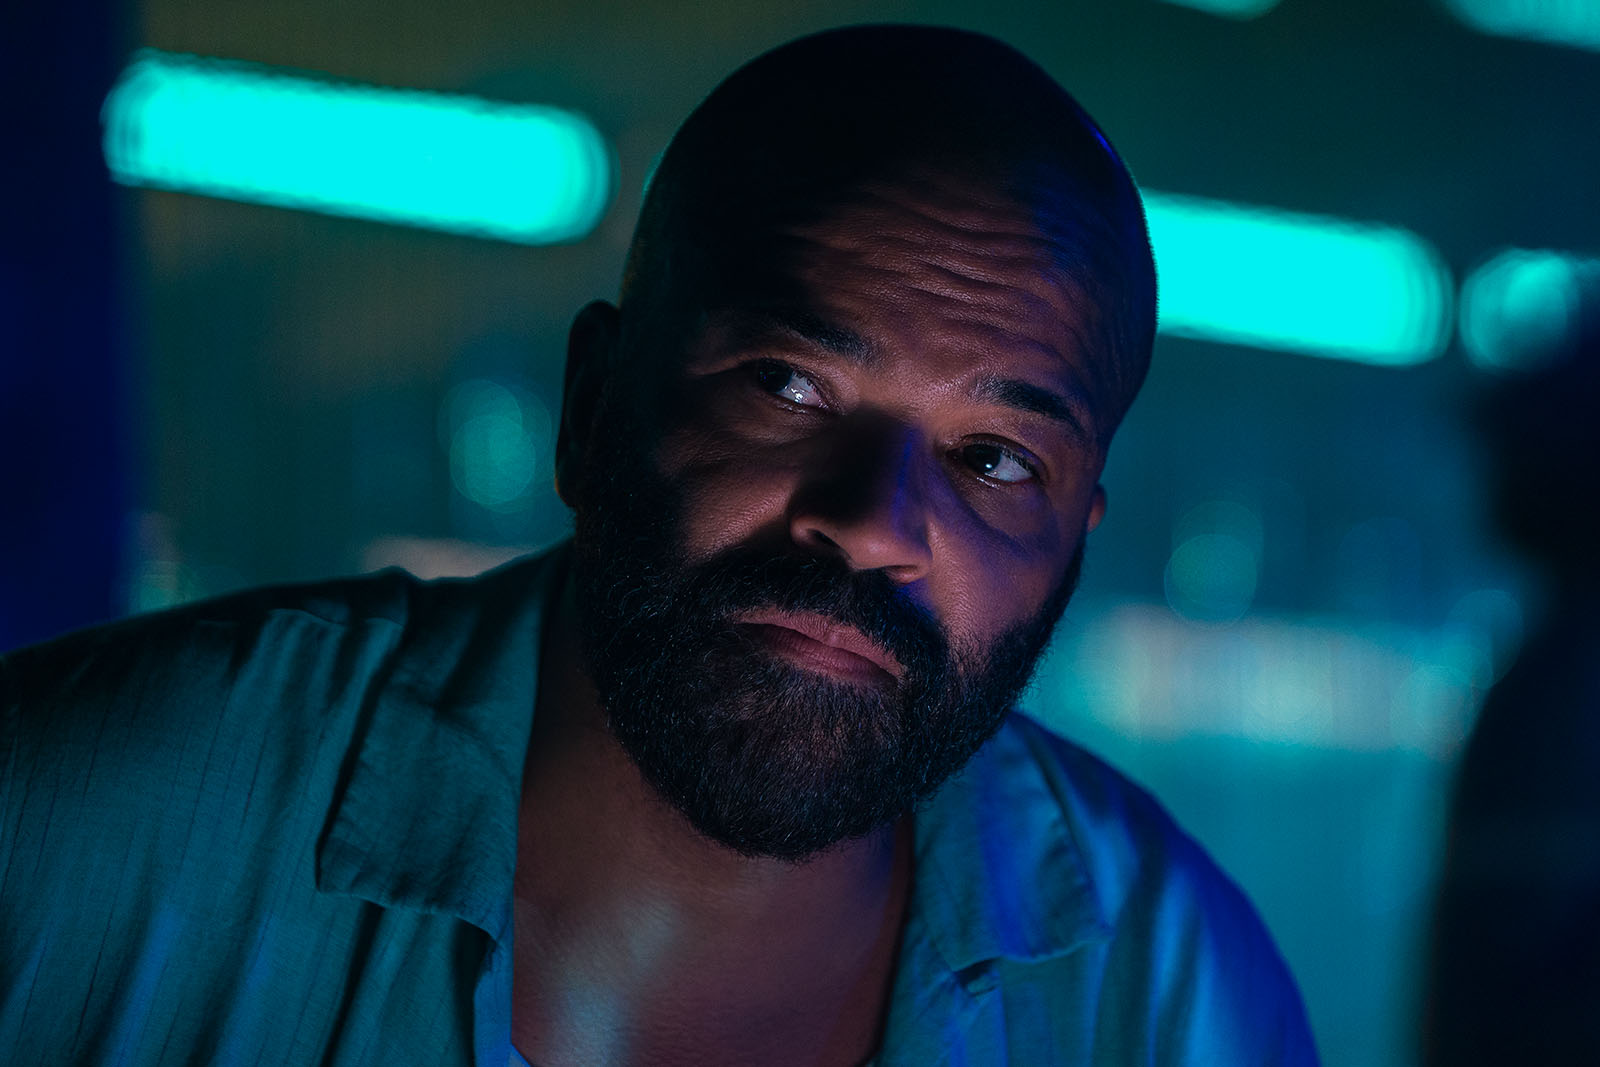 Another familiar face, Jeffrey Wright picks up the role of Felix Leiter again in No Time to Die.